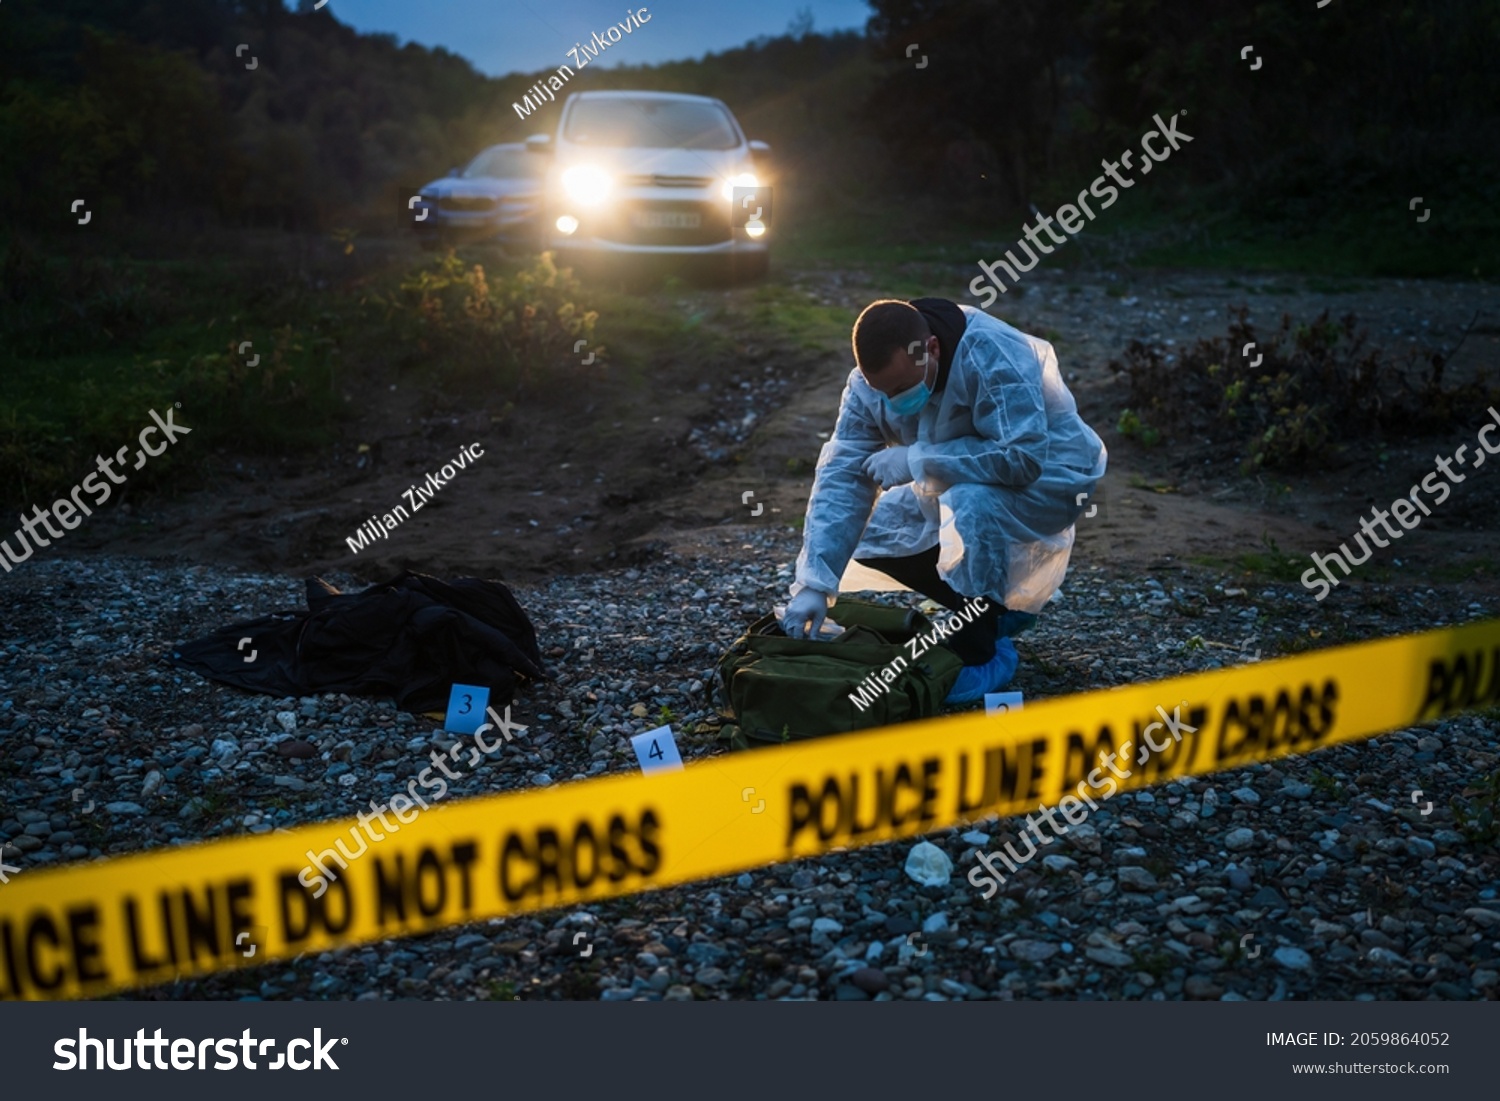 Forensic police investigator collecting evidence at the crime scene in nature at night #2059864052